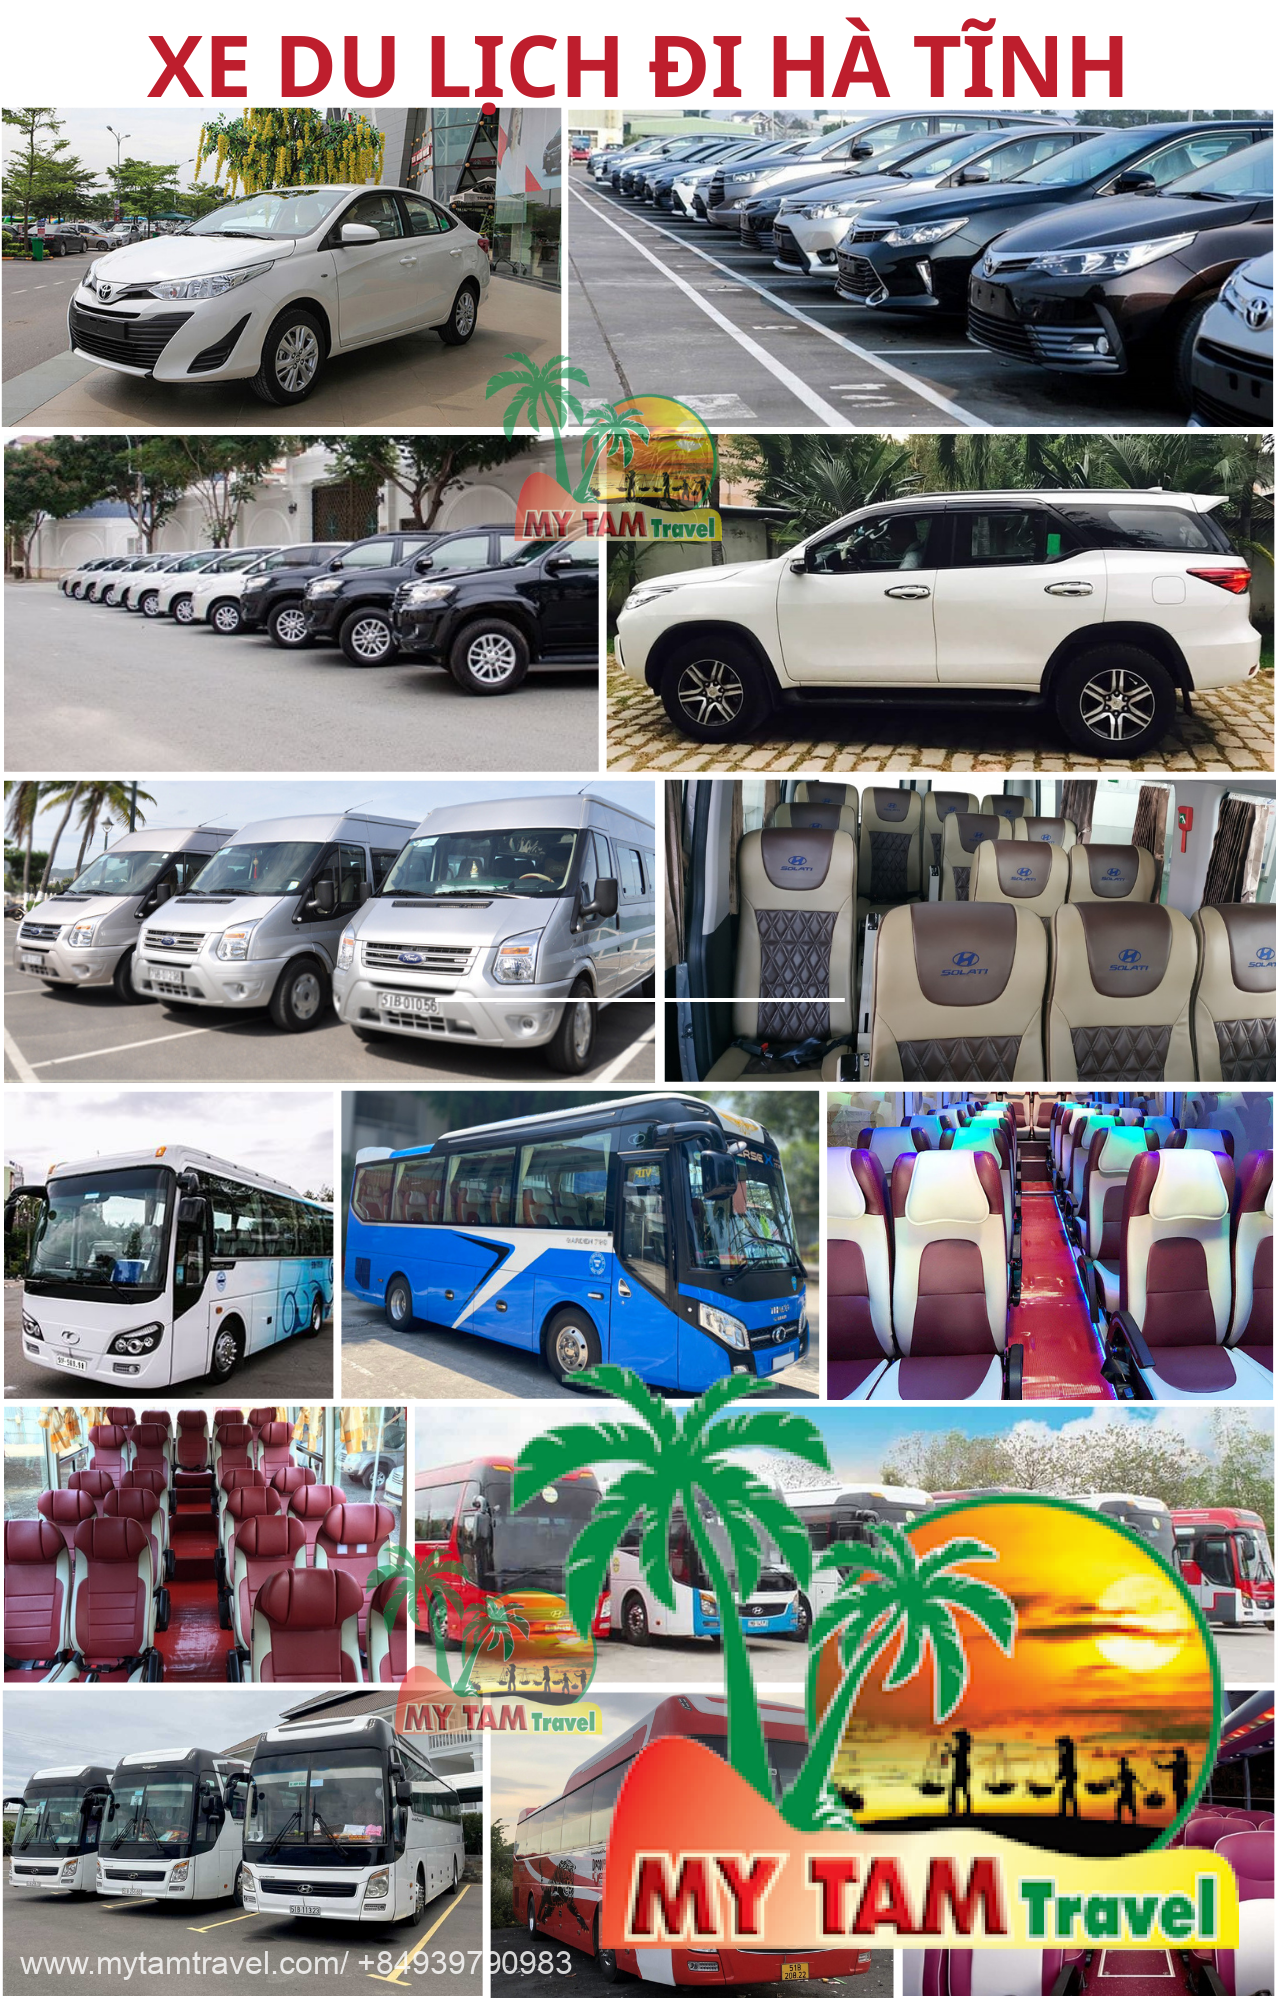 Car rental in ky anh district